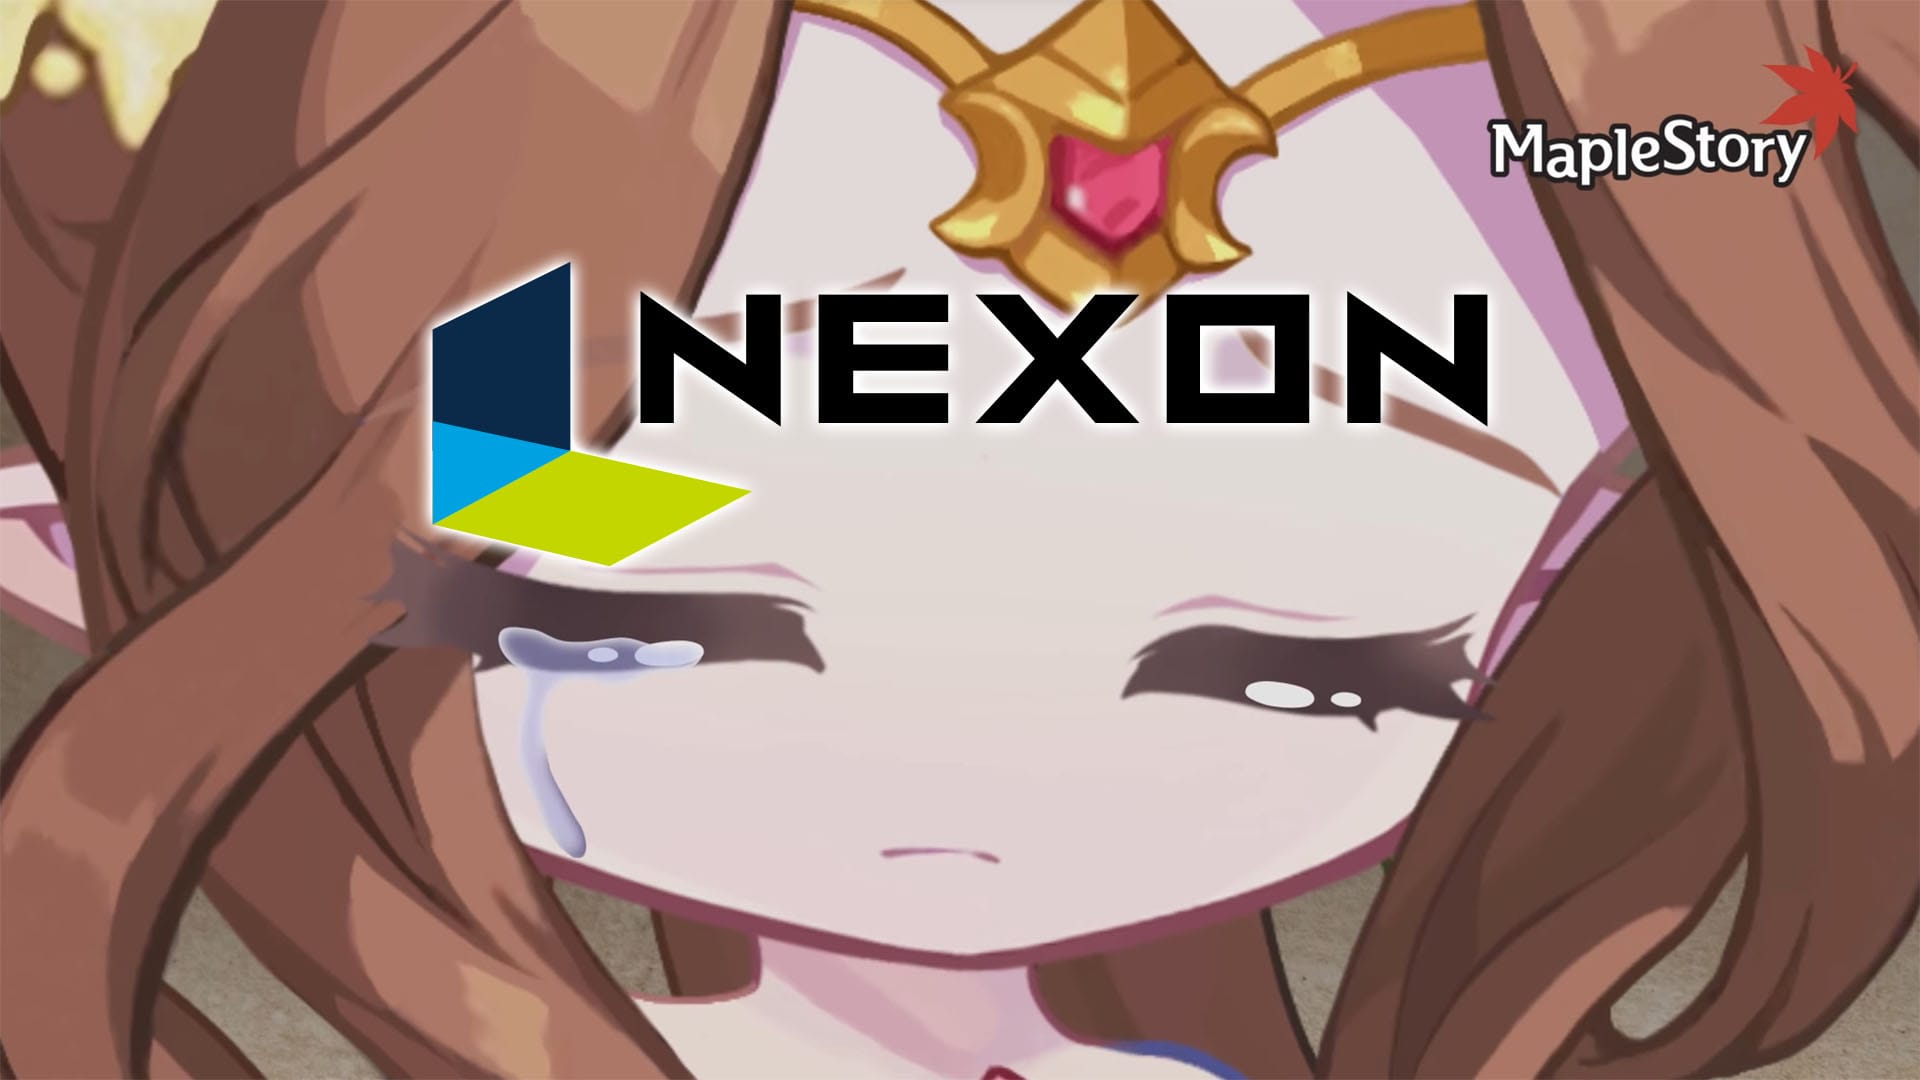 Nexon Apologizes After Regulator Imposes $9 Million Fine for Violations in MapleStory